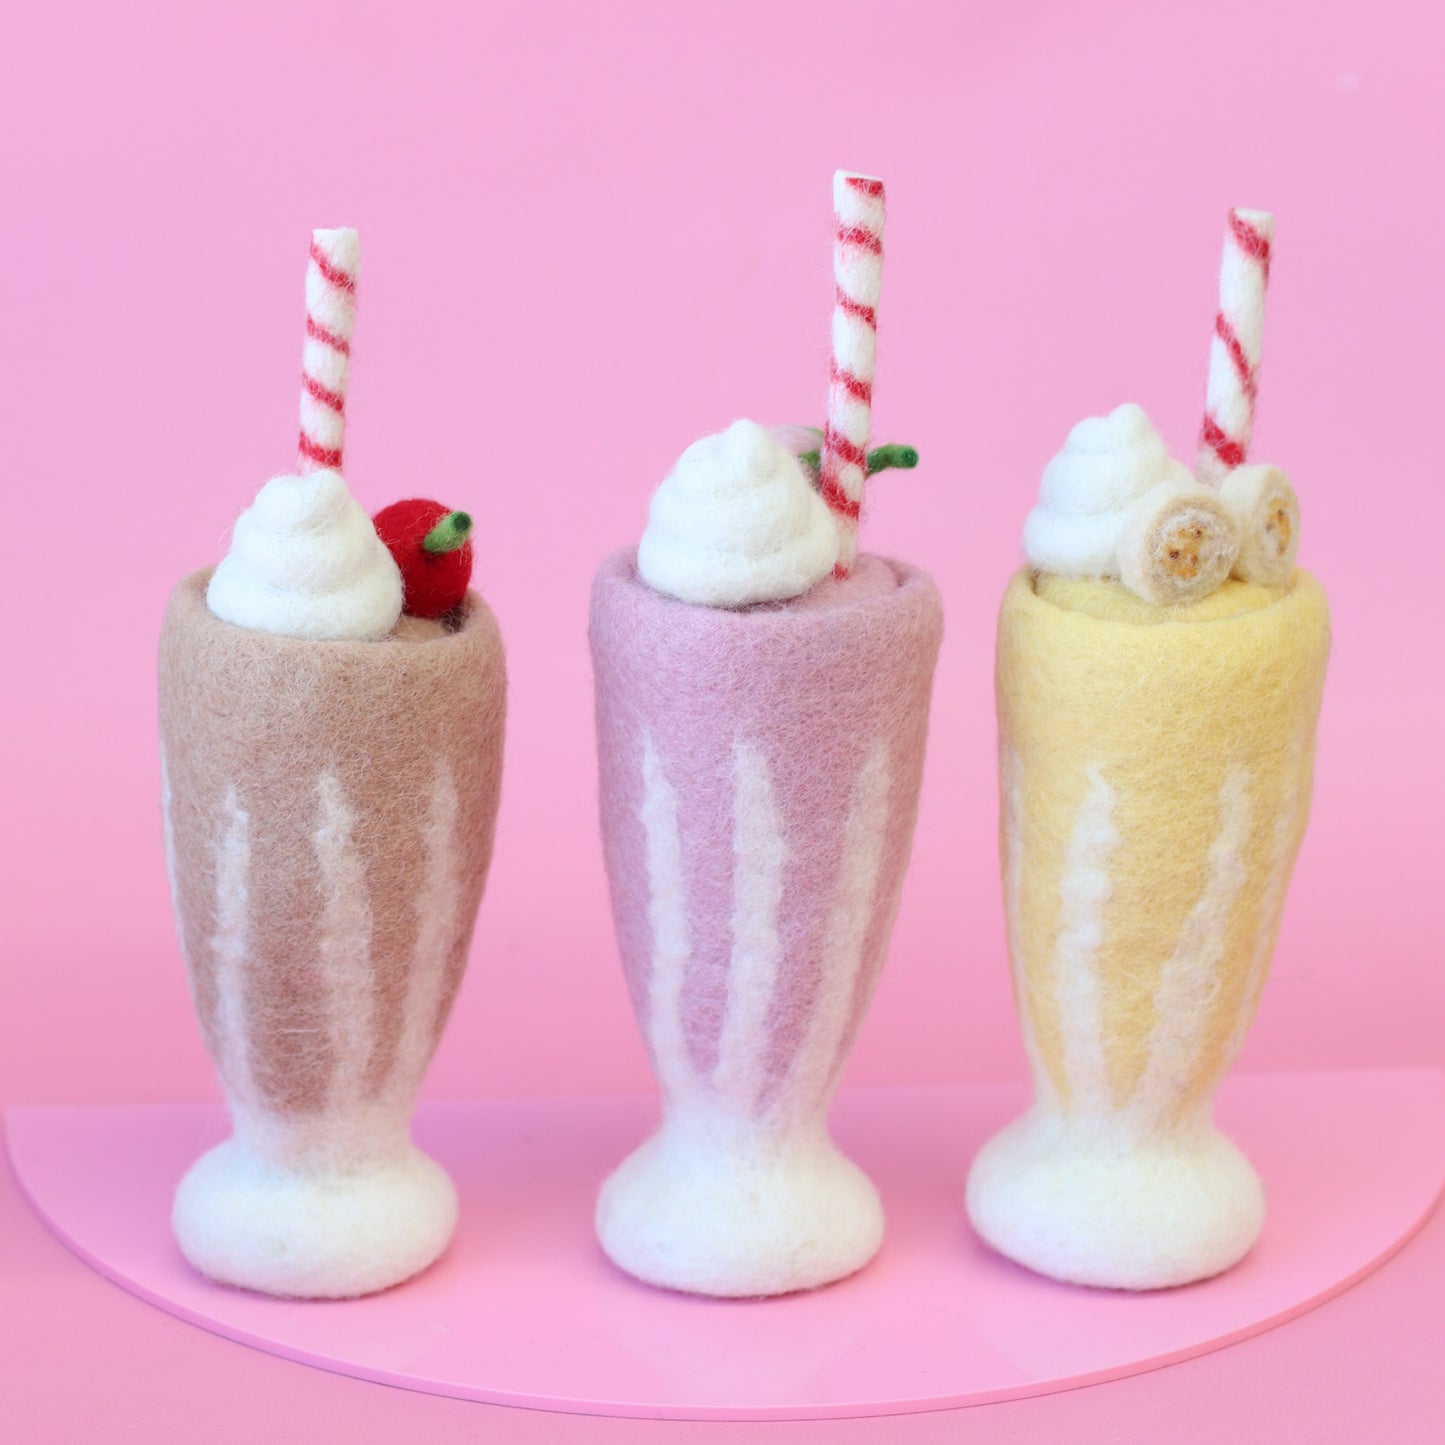 'Shake it up' Milkshakes and smoothies - 9 flavours